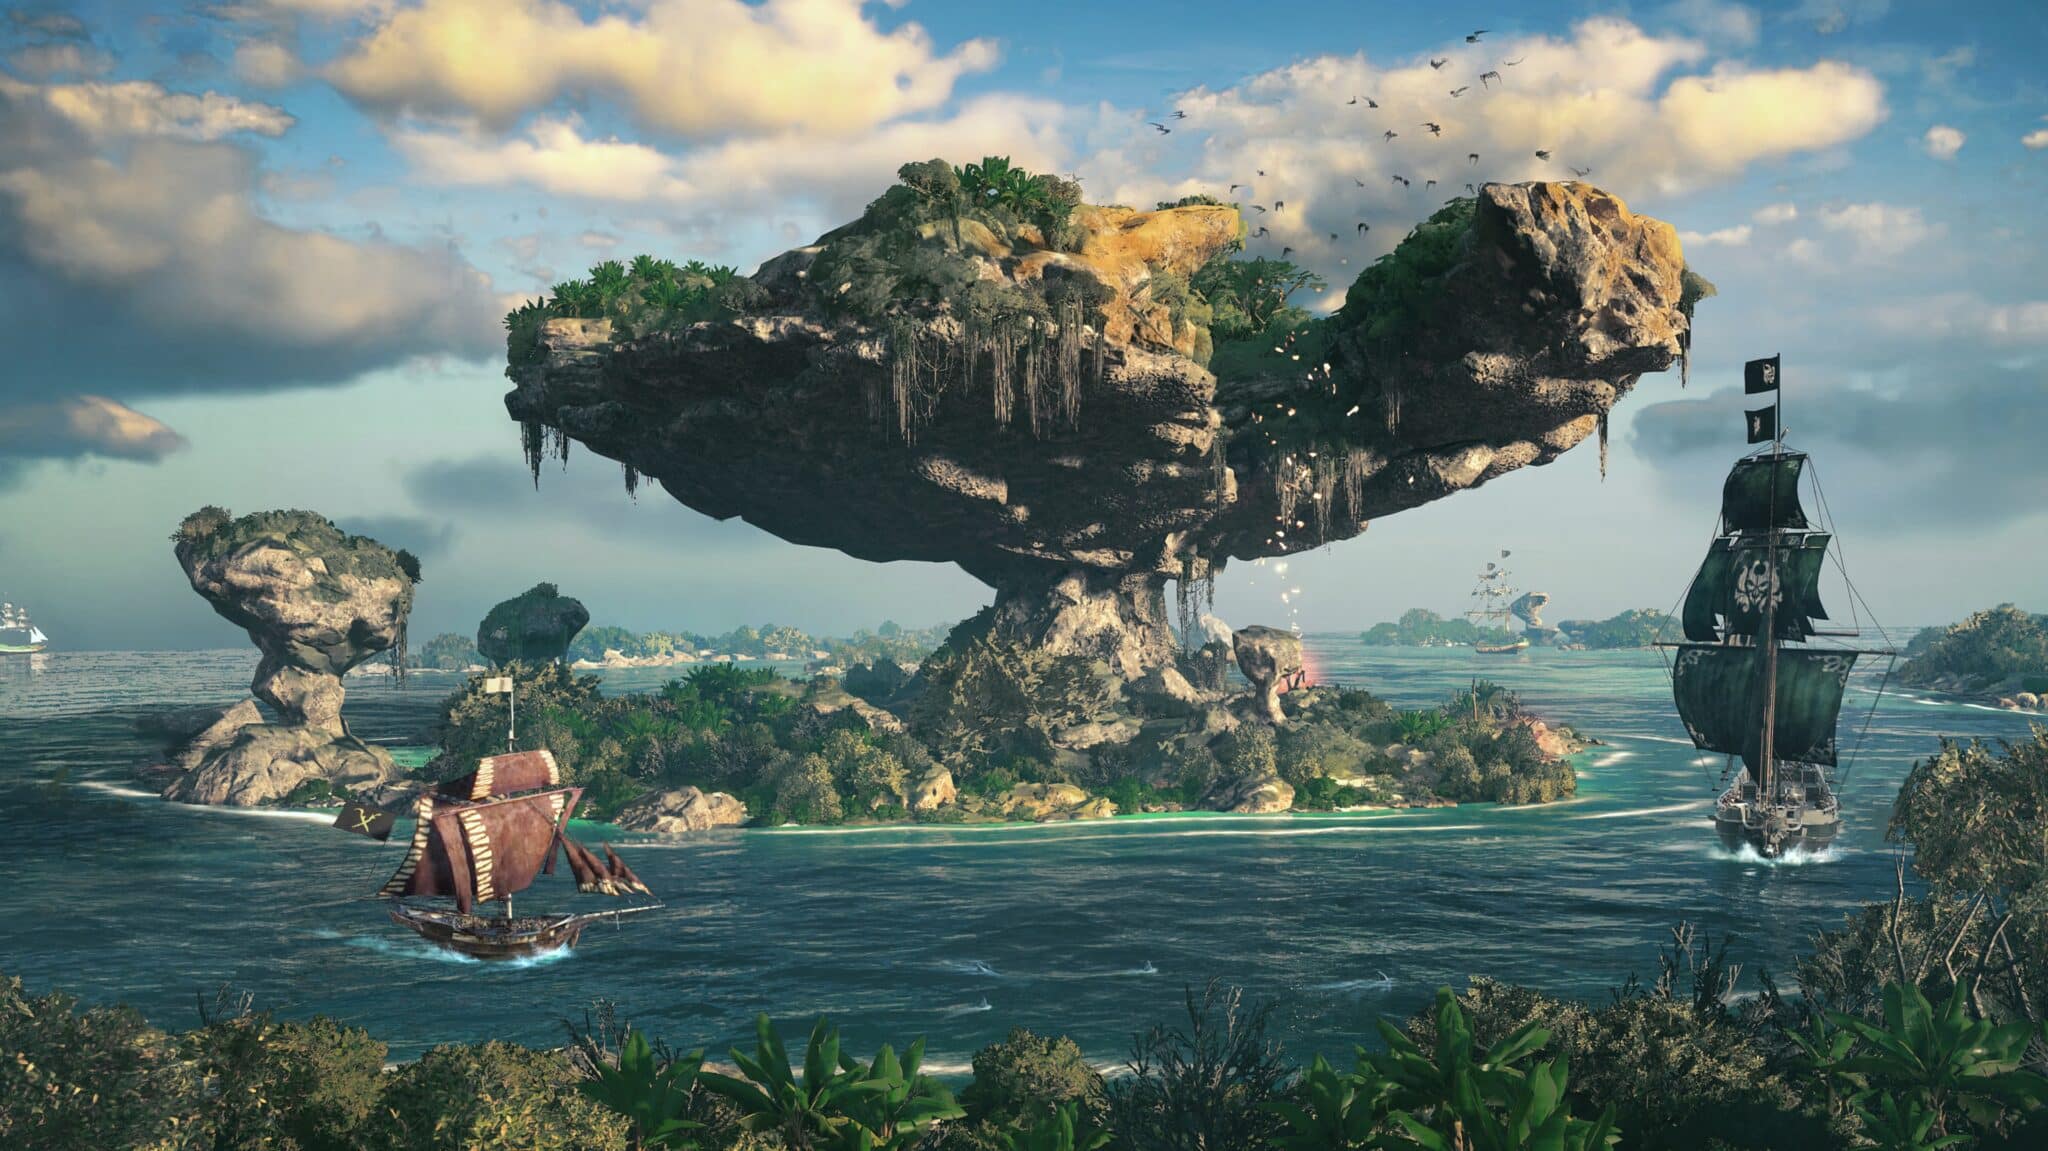 (Skull & Bones Open World is inspired by the East Indies, but also relies on rather ... Imaginative structures.)